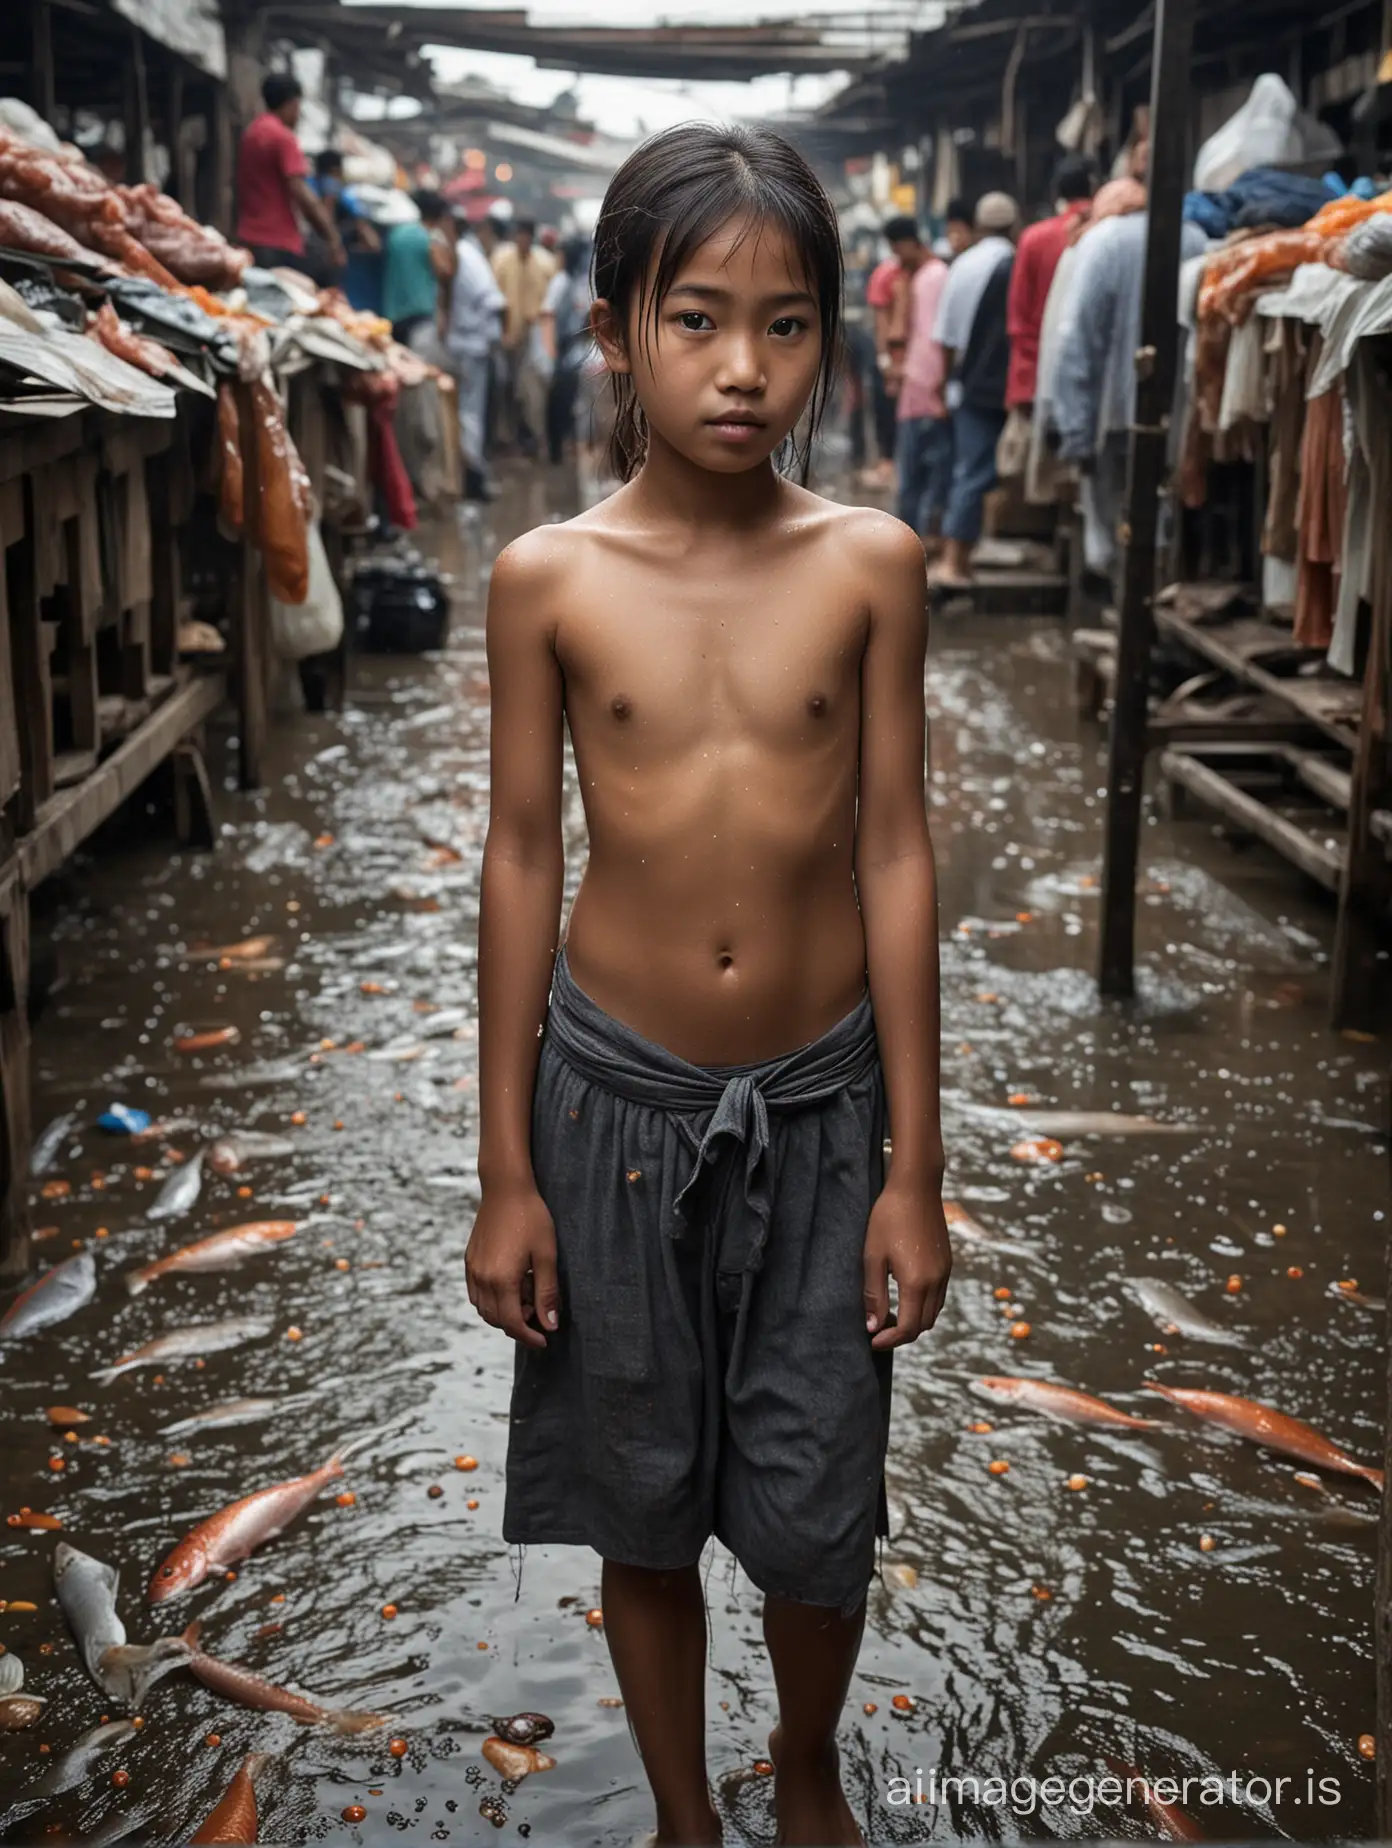 The image of the 15-year-old malay girl walking in the bustling Asian fish market is a striking and poignant one. Despite the chaos and commotion surrounding her, her presence is almost ethereal, standing out from the frenzied energy of the market. The beads of sweat glistening on her bare skin are a testament to the intense heat and humidity of the environment. The broken roof above allows slivers of natural light to filter through, casting an almost otherworldly glow on the girl's sweat-soaked frame. Her nudity adds a layer of vulnerability to the scene, as she stands exposed in a crowded and chaotic space. It is a powerful image that captures the rawness and harshness of life in a busy fish market, but also the innocence and resilience of this young girl. Despite the harsh conditions, she stands tall with a quiet strength, a symbol of the human spirit's ability to endure and persevere. This image invites us to reflect on the stark realities of life for many in this part of the world, but also serves as a reminder of the beauty and strength that can be found in unexpected places.